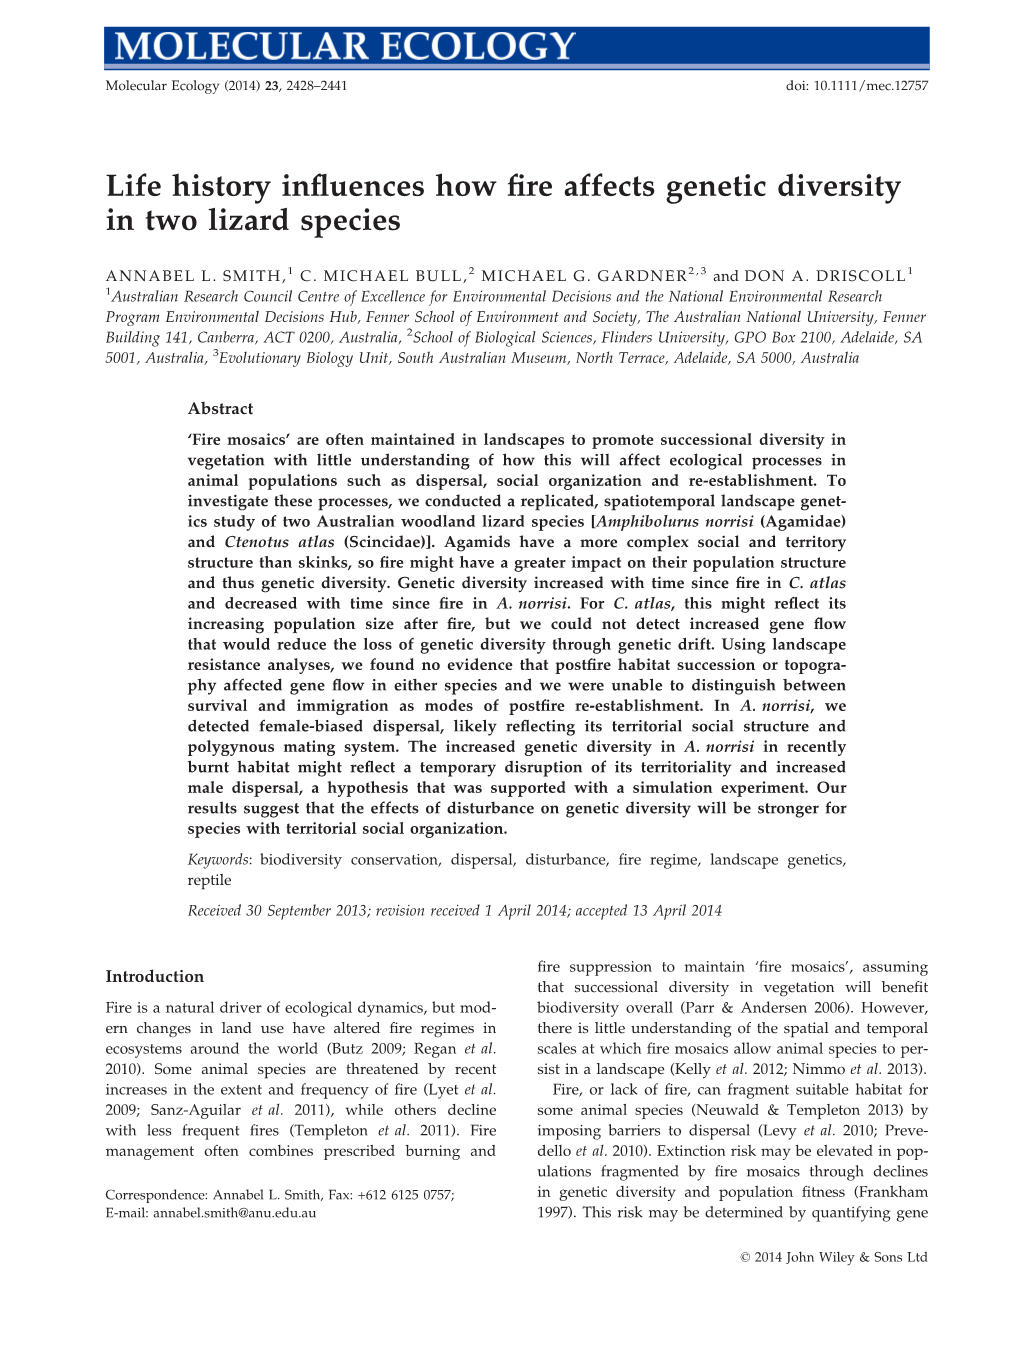 Life History Influences How Fire Affects Genetic Diversity in Two Lizard Species